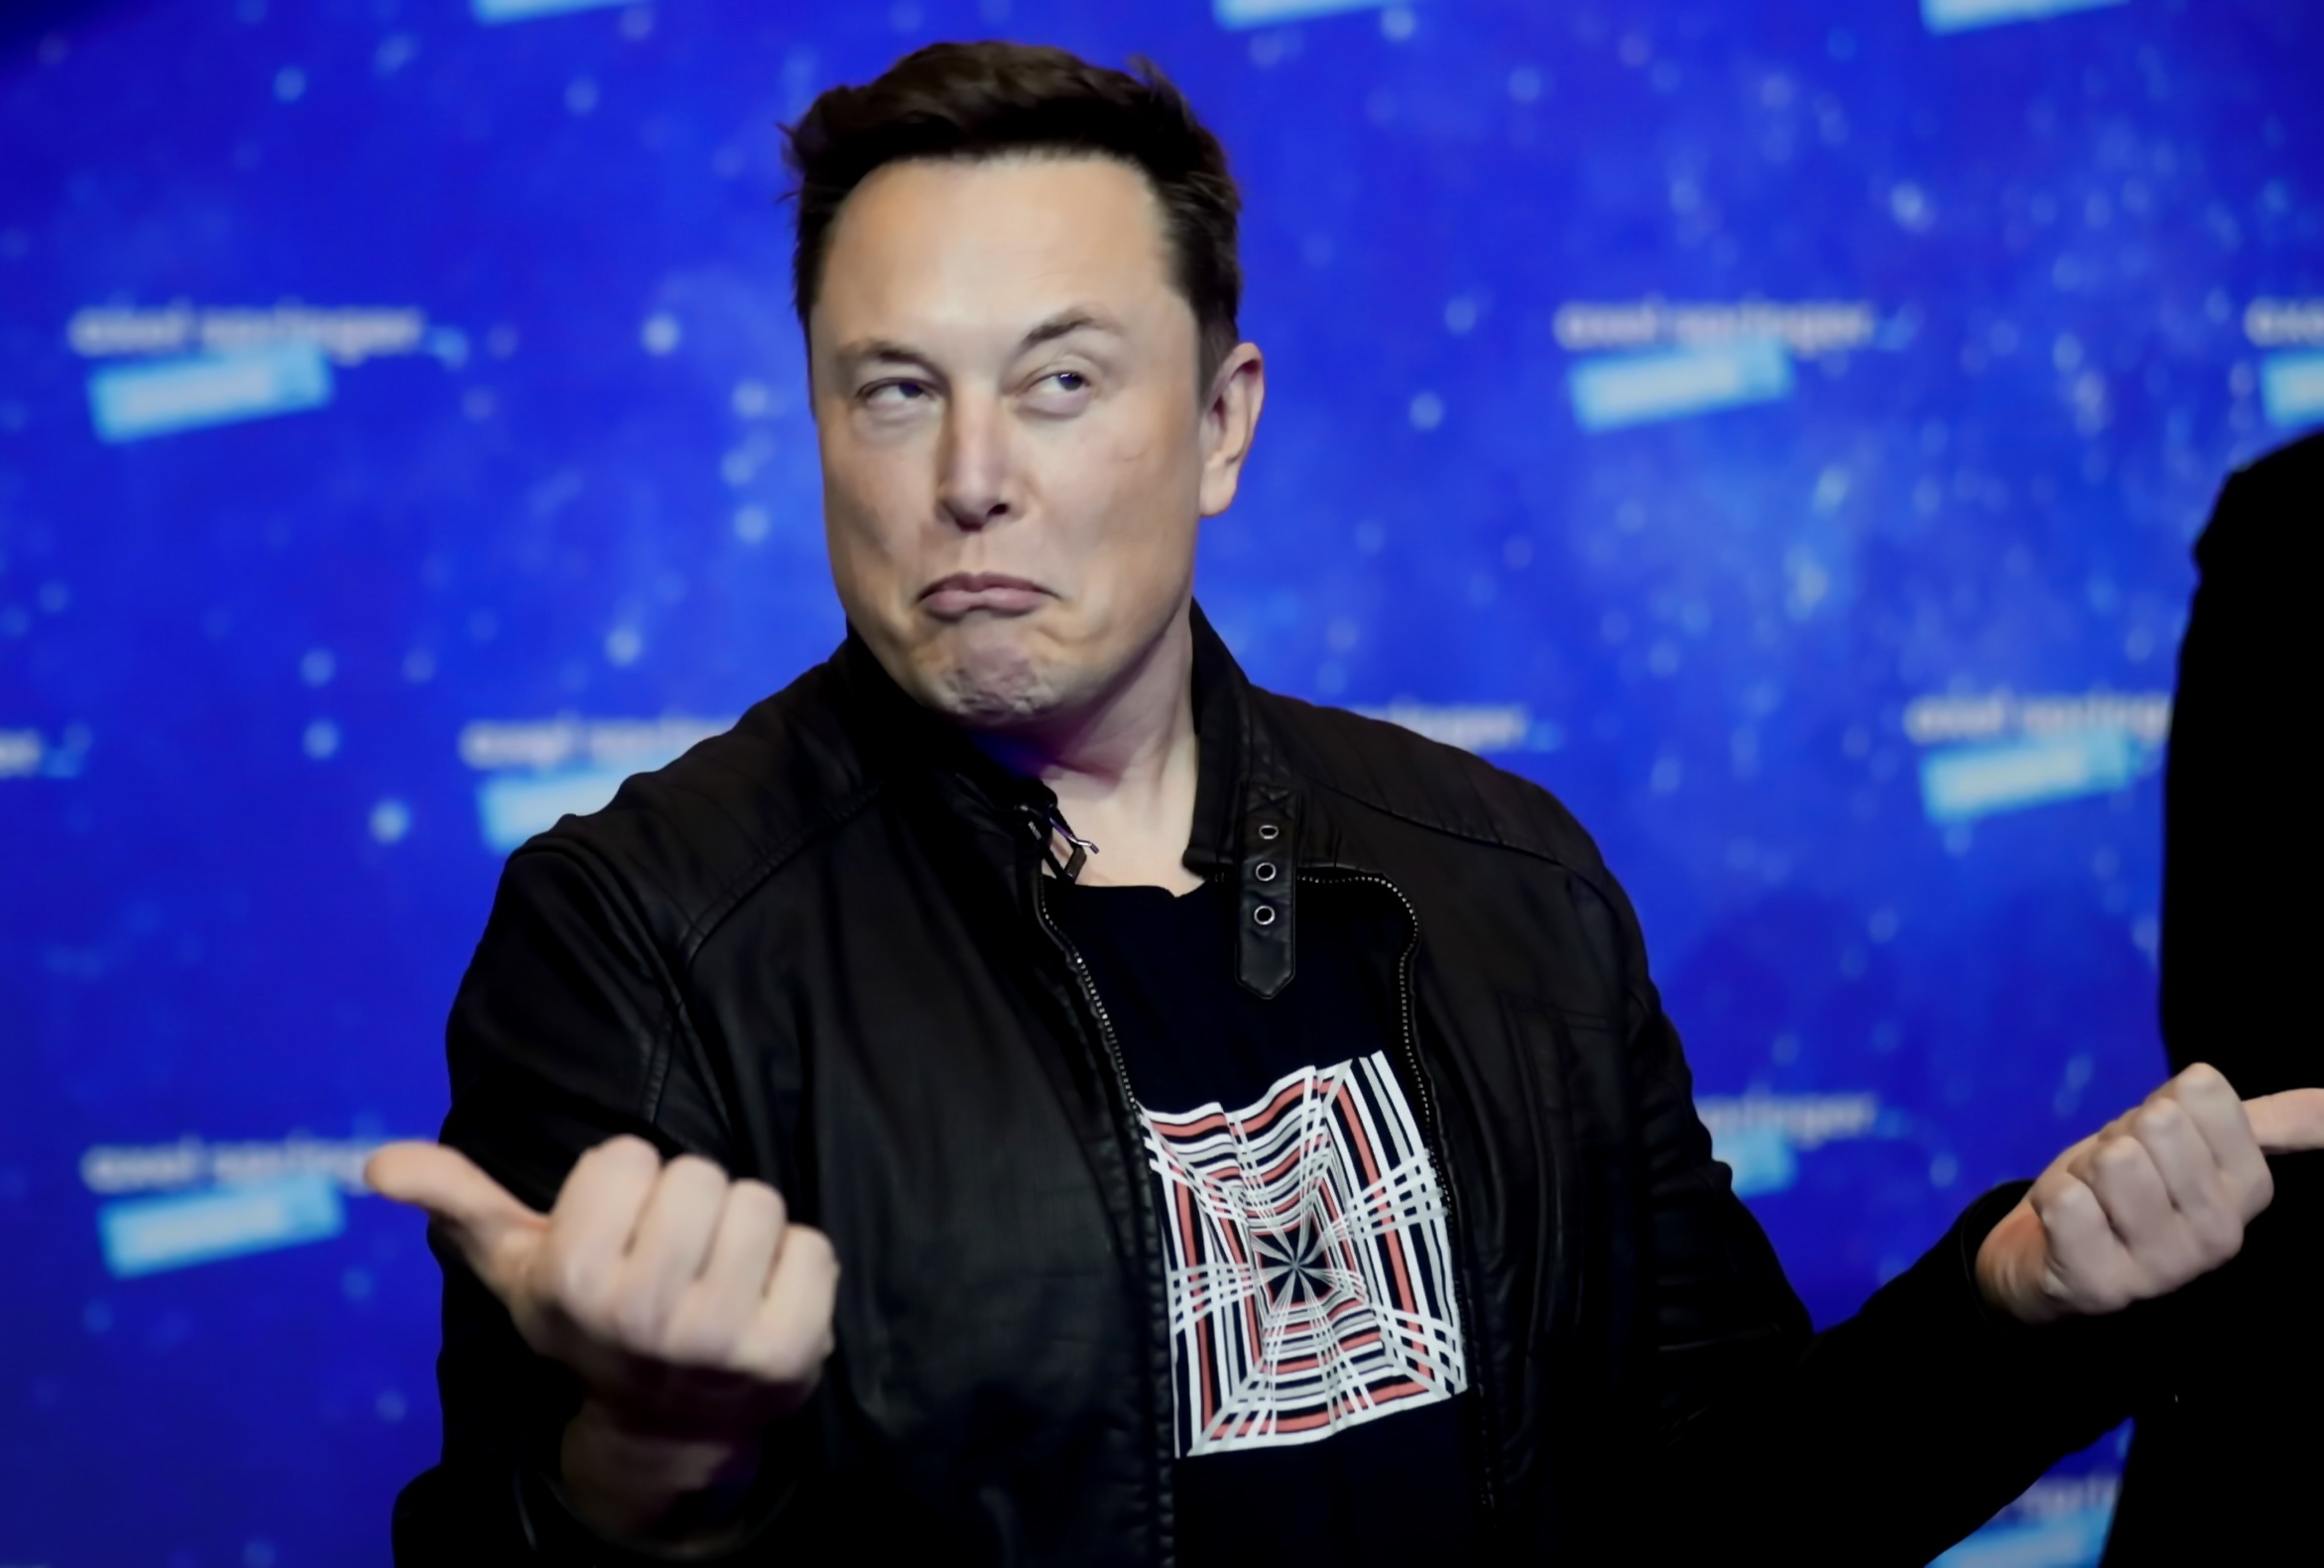 They stole thousands of dollars worth of Bitcoin by impersonating Elon Musk